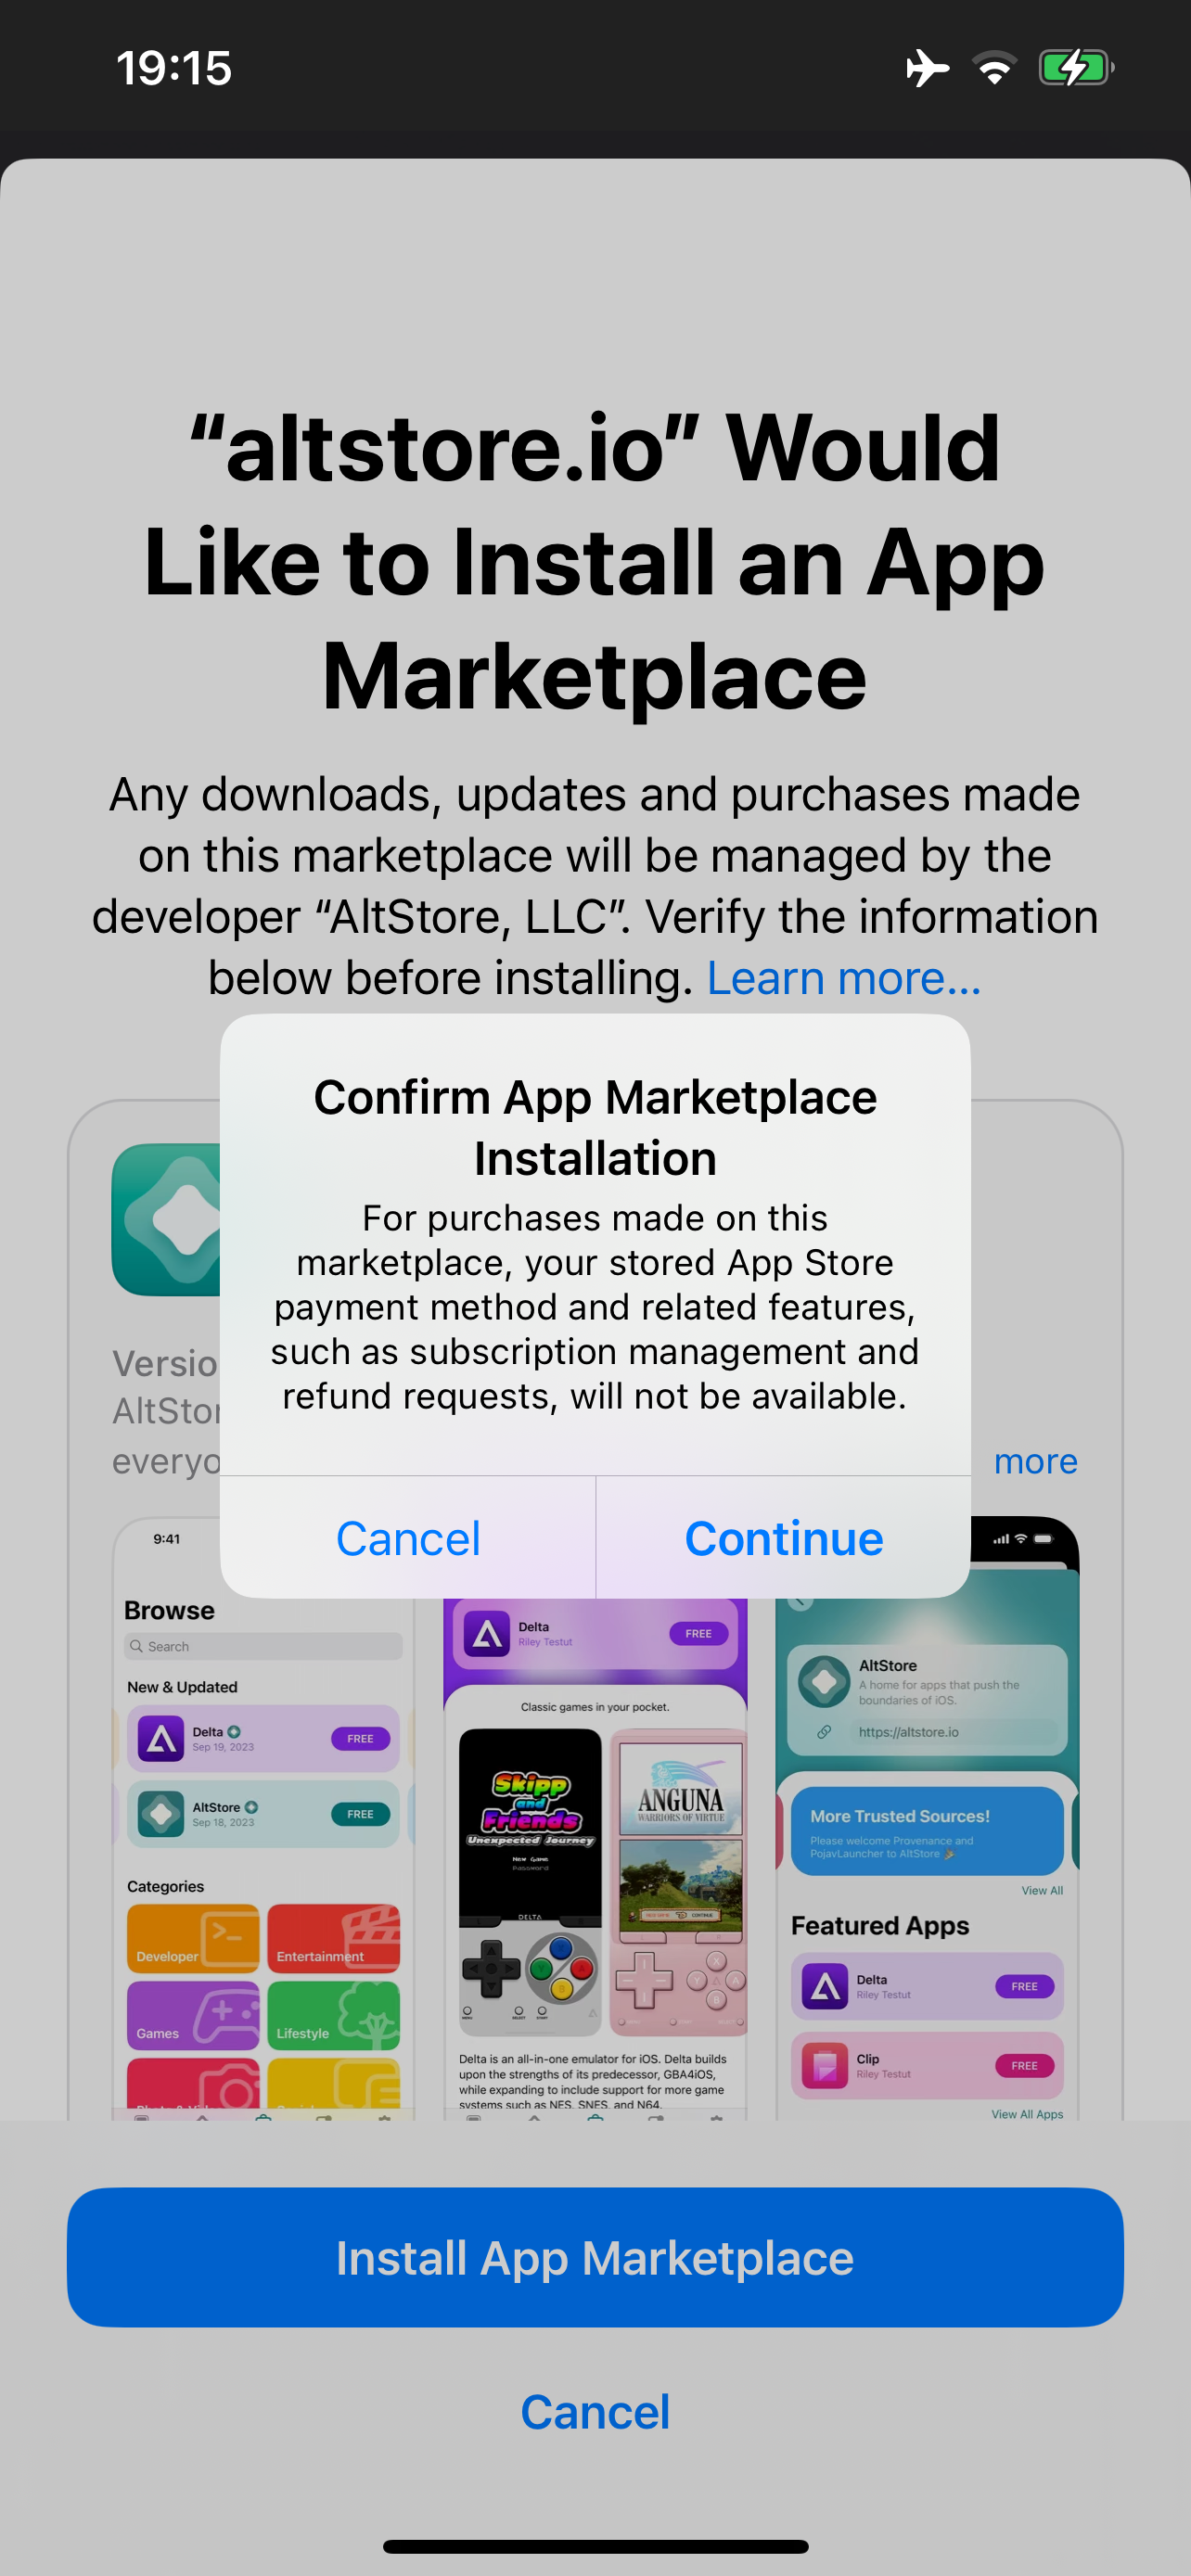 A full-screen prompt in Safari: “altstore.io” Would Like to Install an App Marketplace Any downloads, updates and purchases made on this marketplace will be managed by the developer “AltStore, LLC”. Verify the information below before installing. Learn more… There is then a description and screenshots of the app, followed by buttons: [Install App Marketplace] with blue background, [Cancel] with neutral blue text. On top of it, an alert saying Confirm App Marketplace Installation For purchases made on this marketplace, your stored App Store payment method and related features, such as subscription management and refund requests, will not be available. Buttons: [Cancel] [Continue]